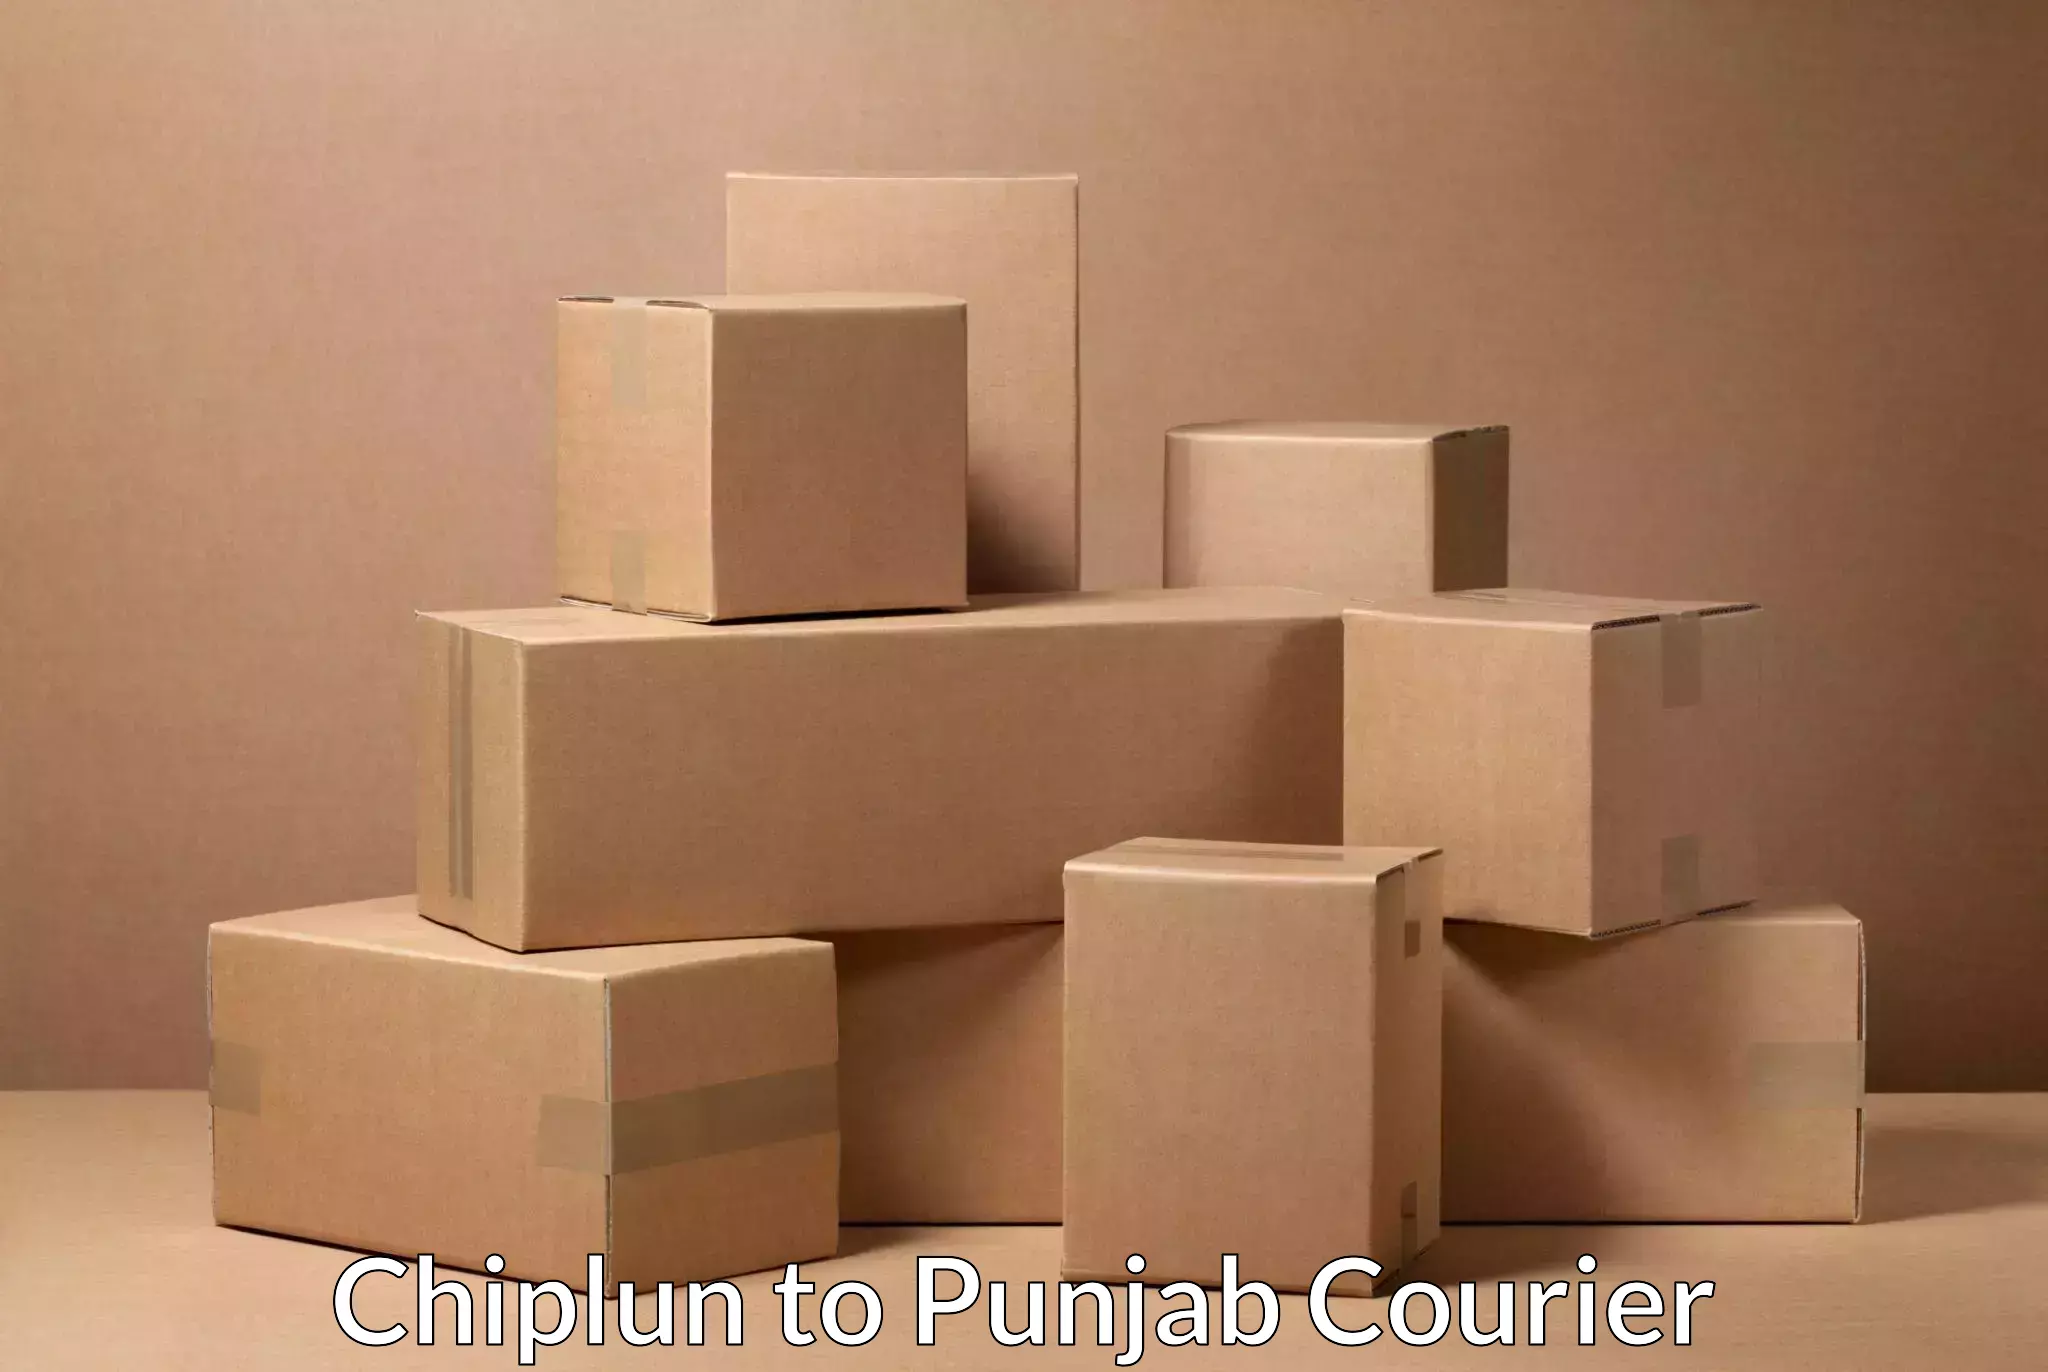 Residential courier service in Chiplun to Amritsar